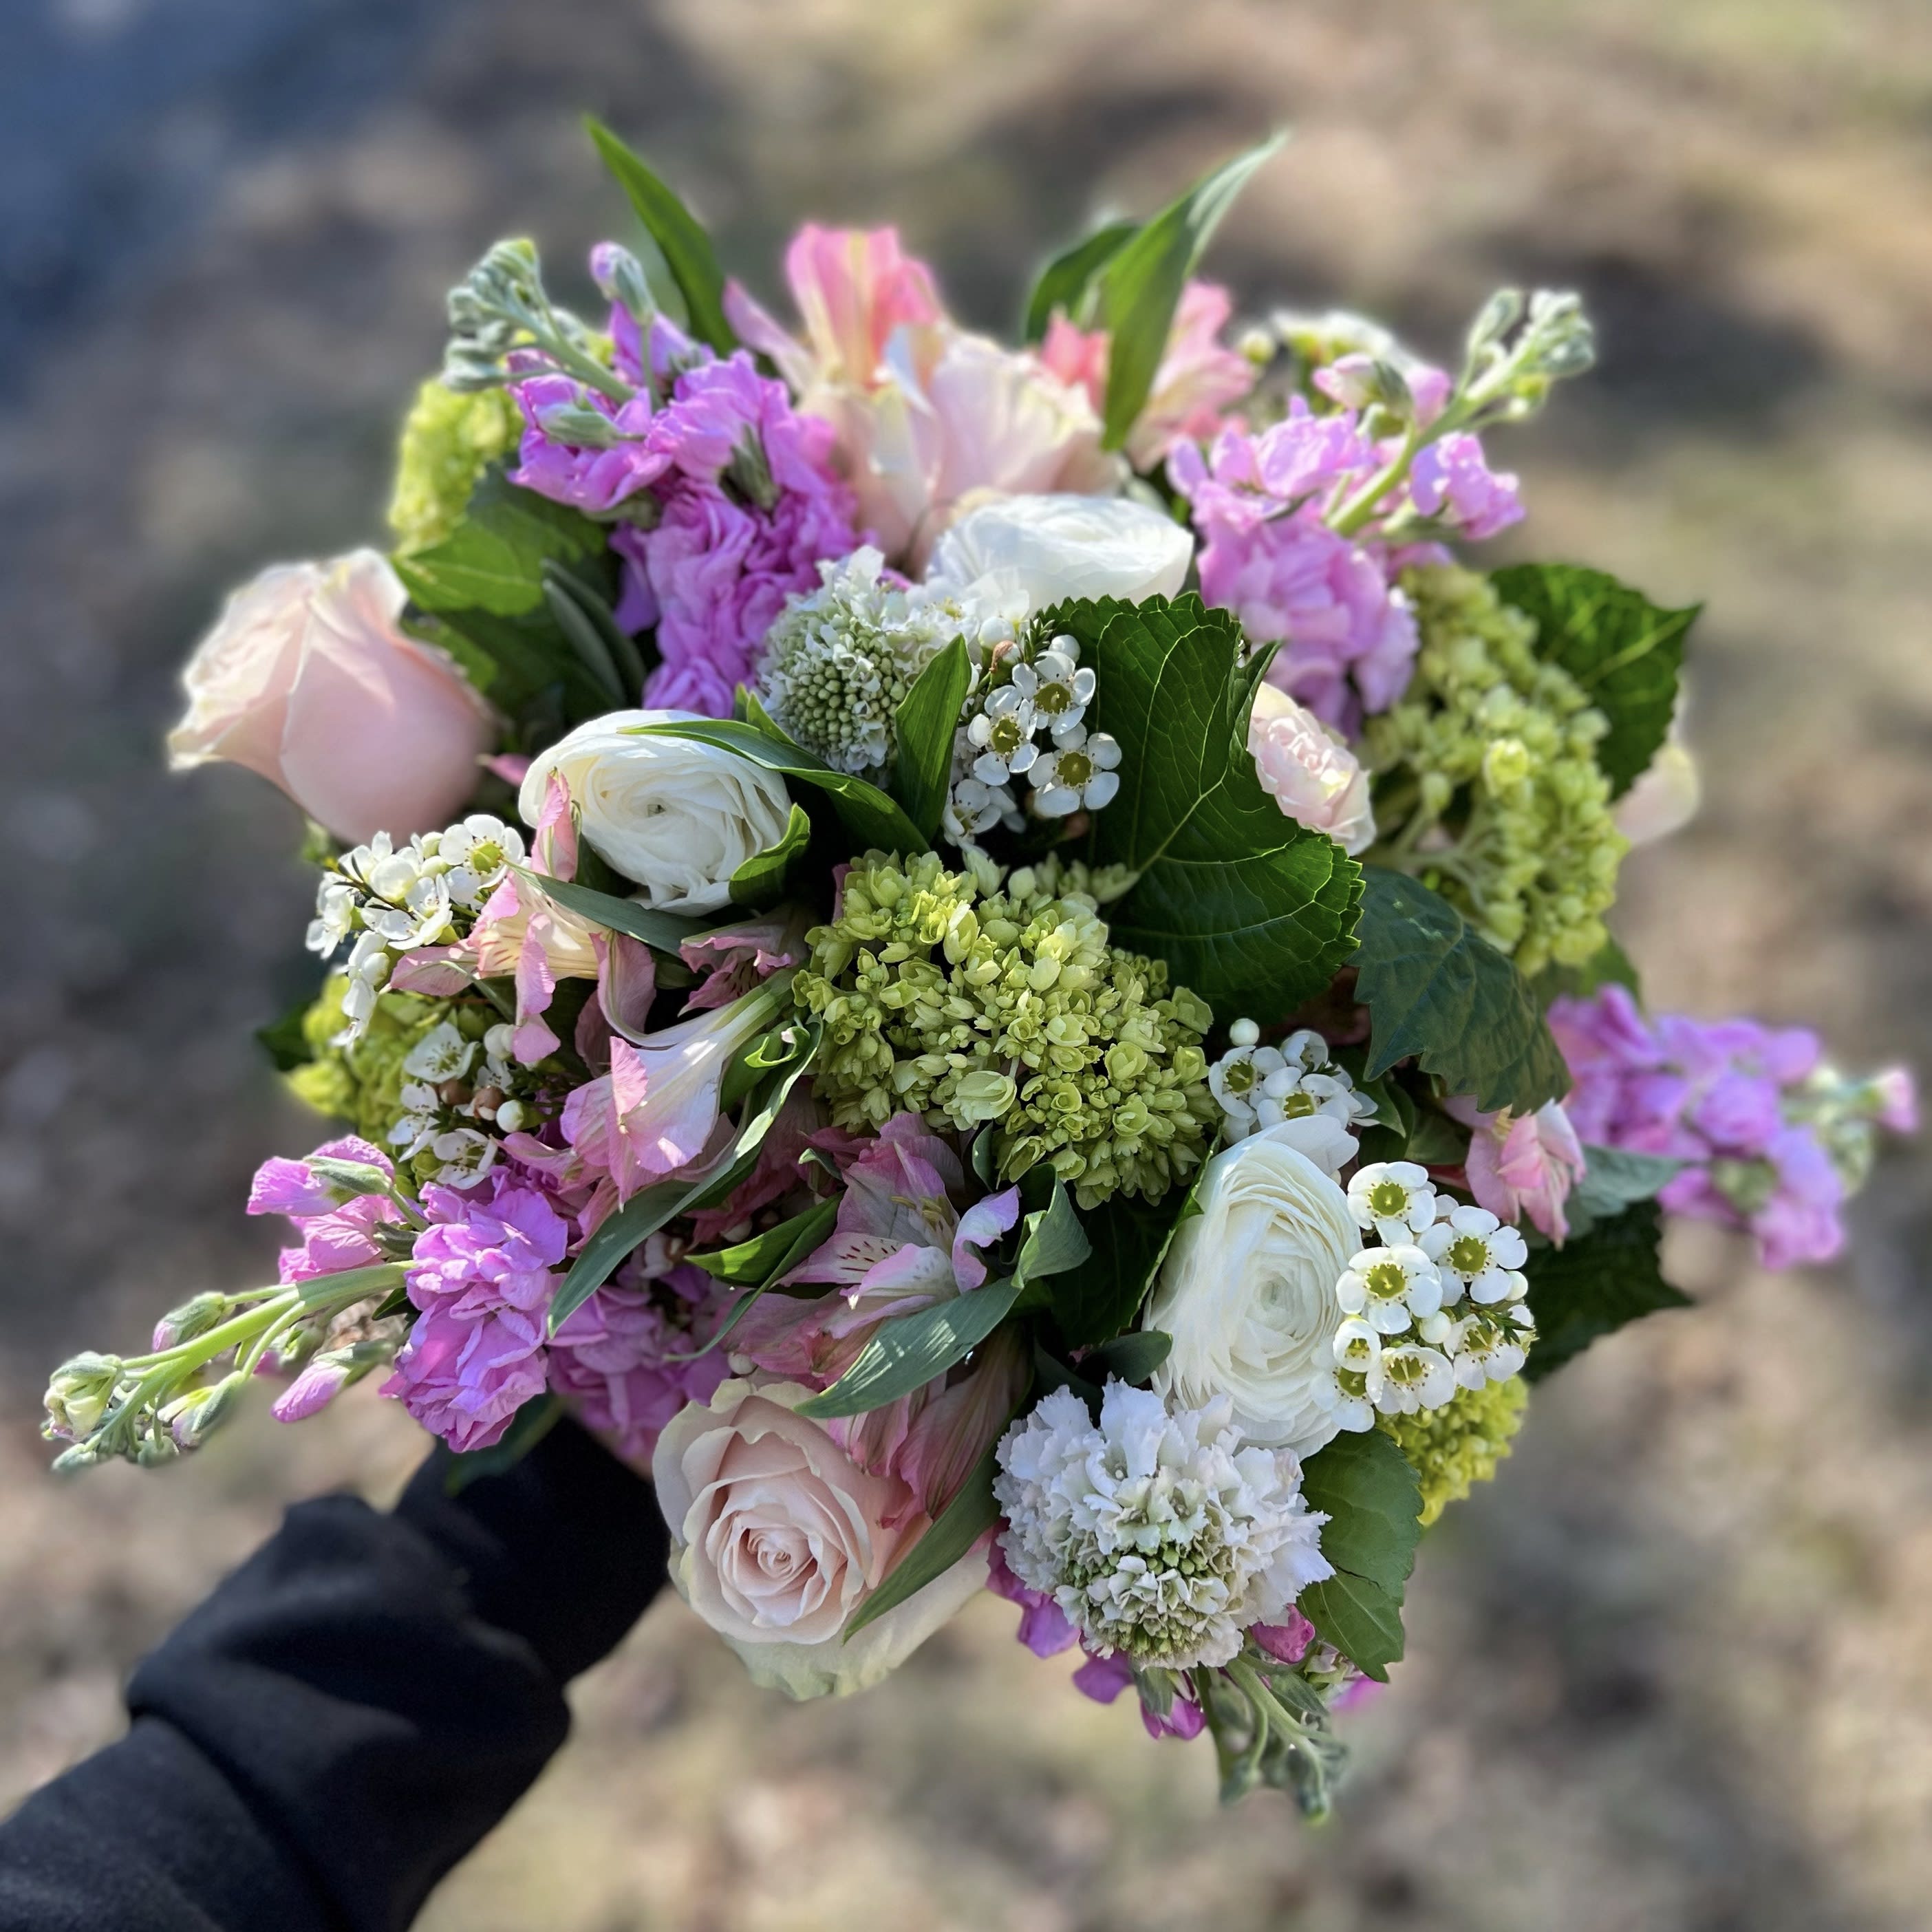 Pretty in Pink - Florist crafted bouquet with shades of pink. Design varies upon availability and sizing. Premium product is shown. The actual product may differ slightly to the photo but will match its size and theme.